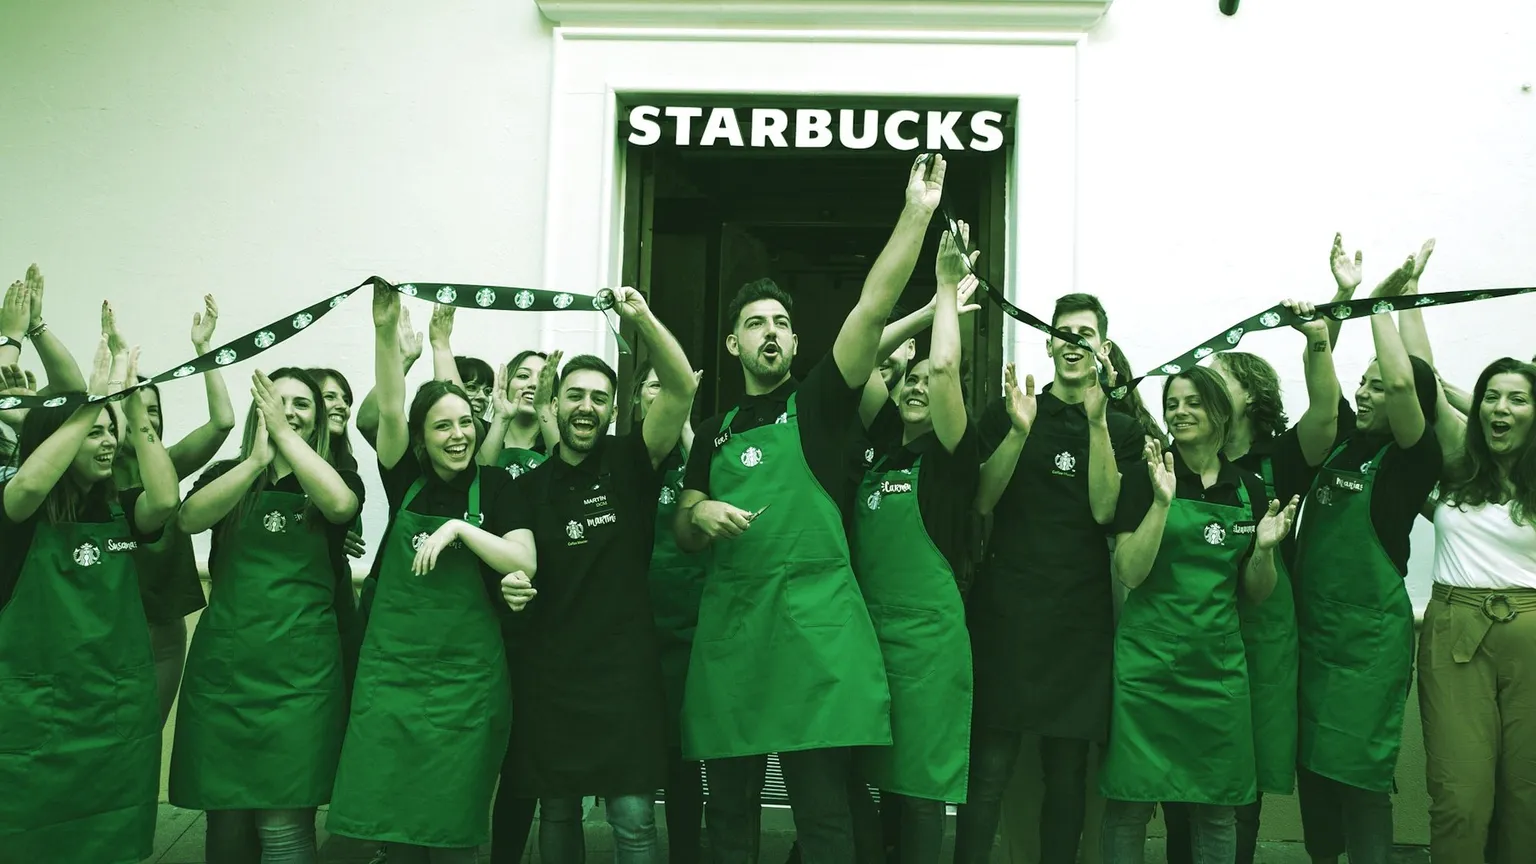 Starbucks staff celebrate the opening of a store in Cordoba, Spain. Image: 